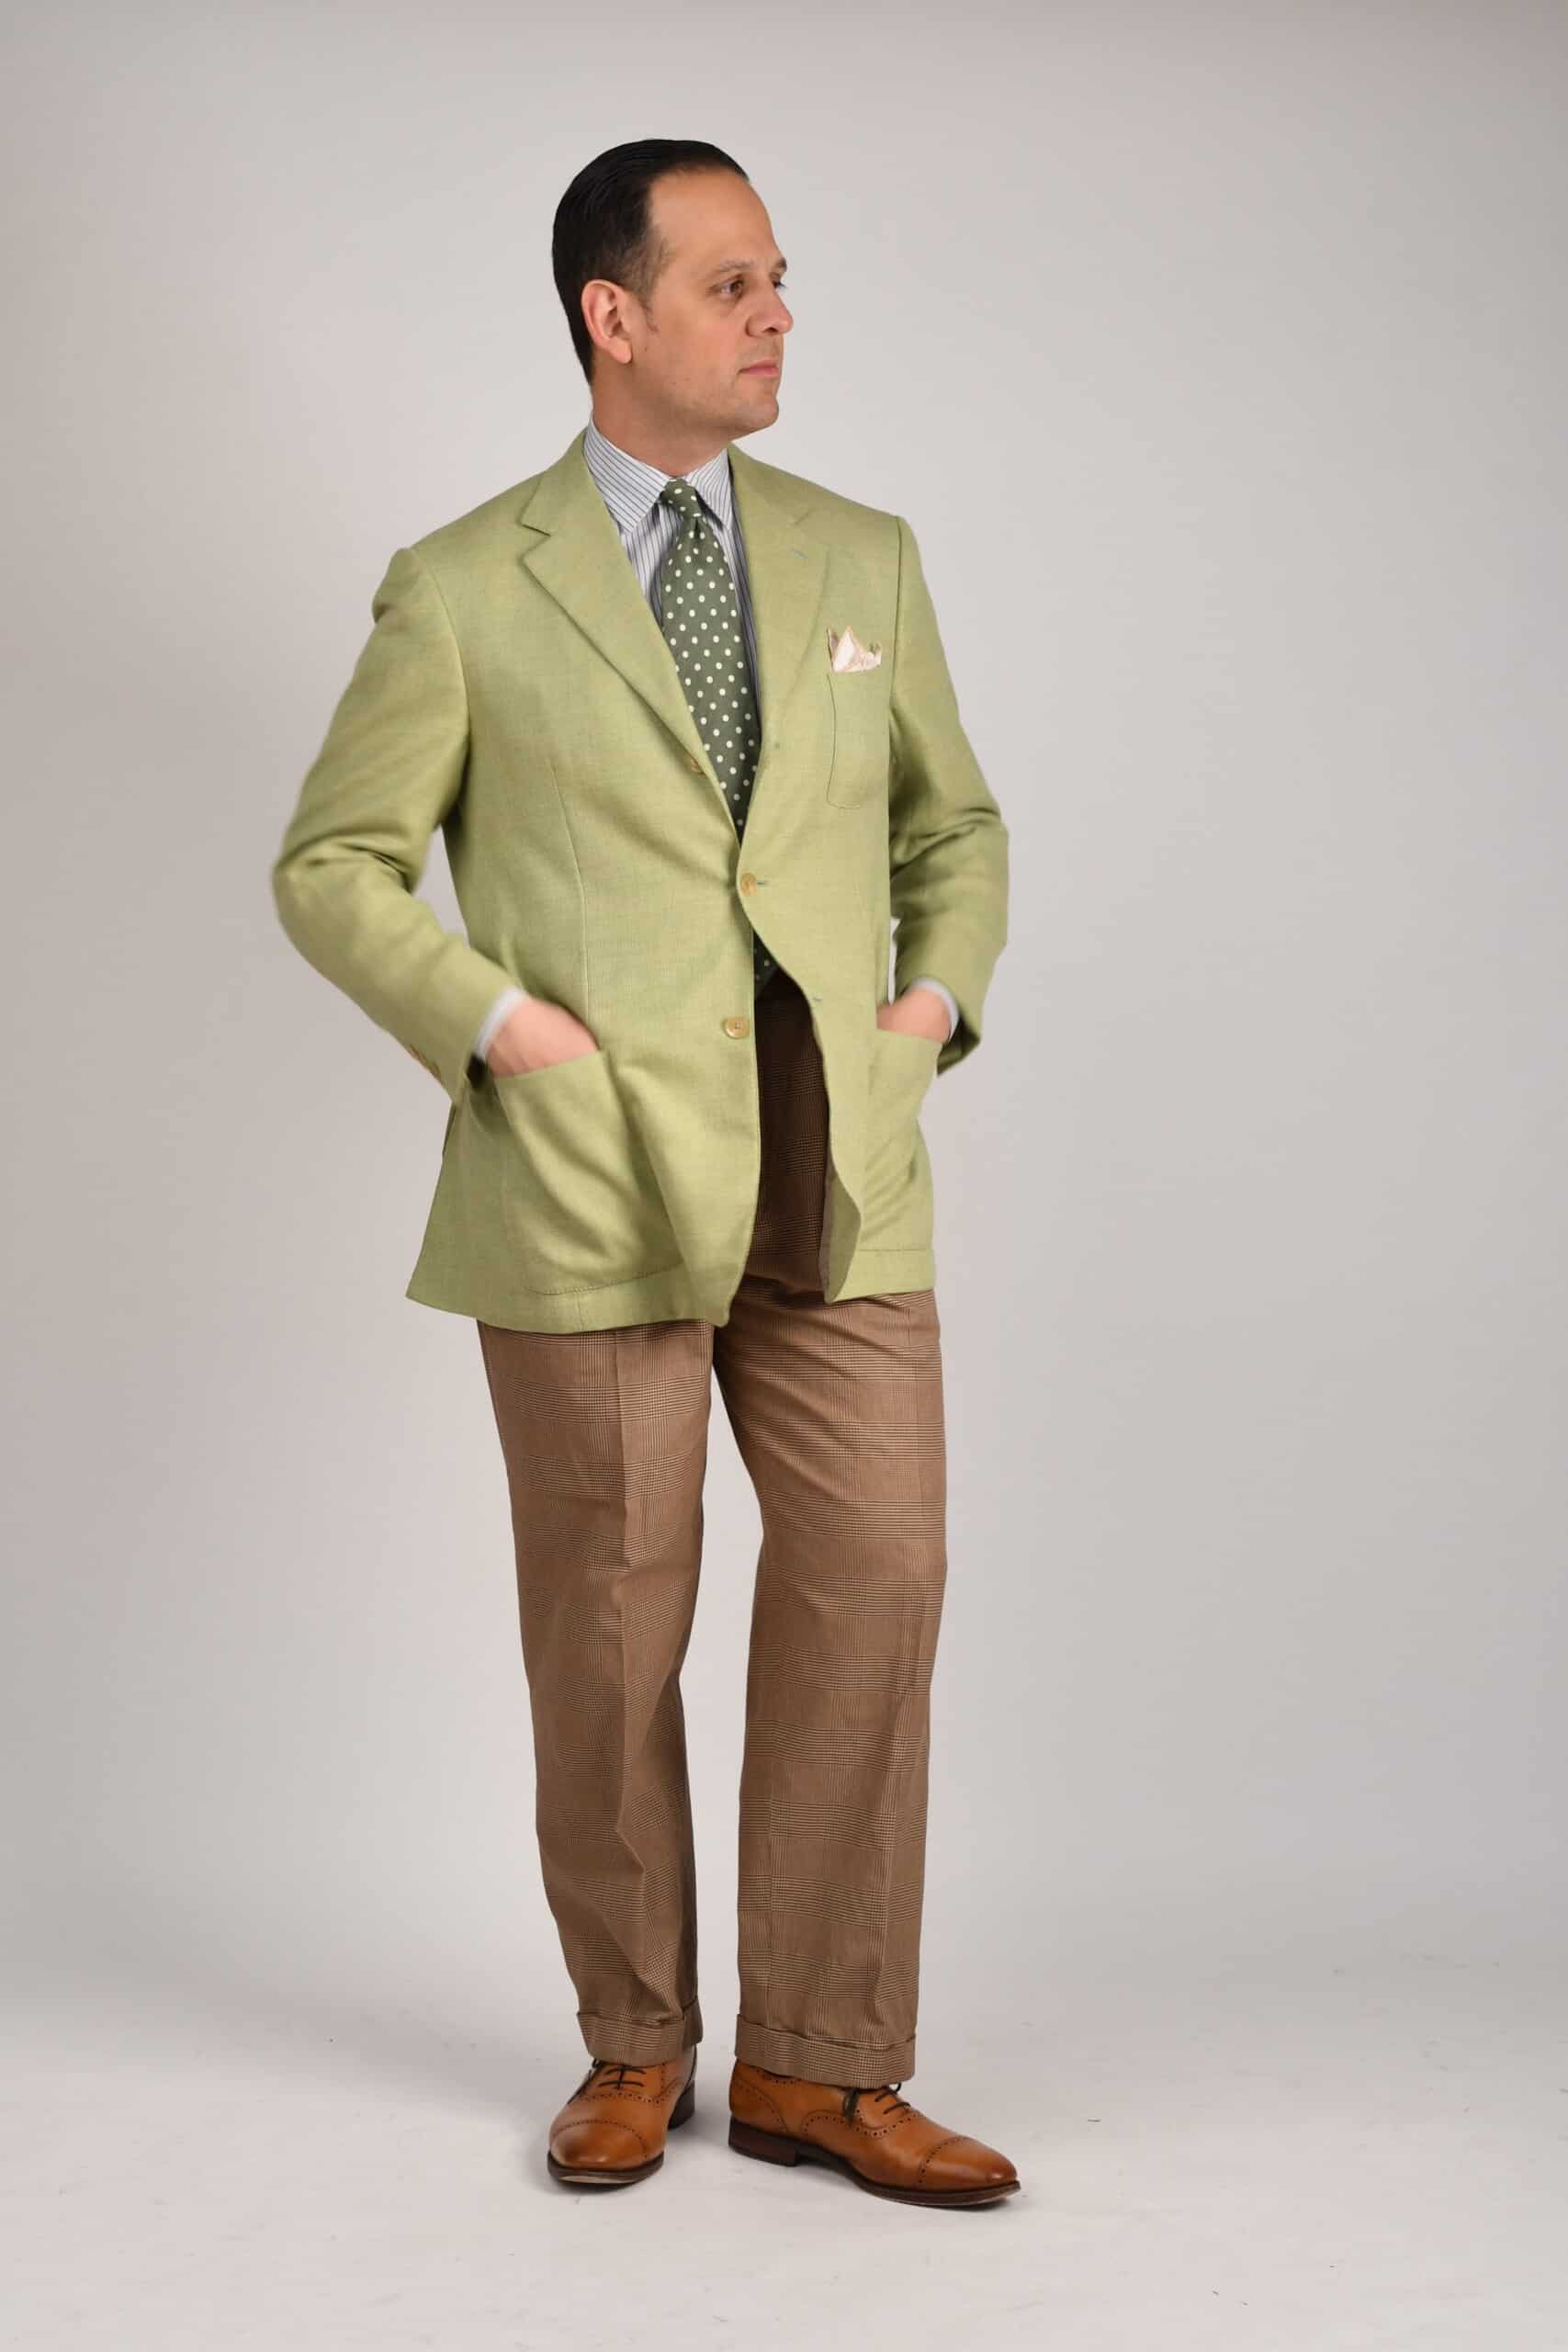 Tan Oxfords are added to an off jacket and pants combination for a semi casual look